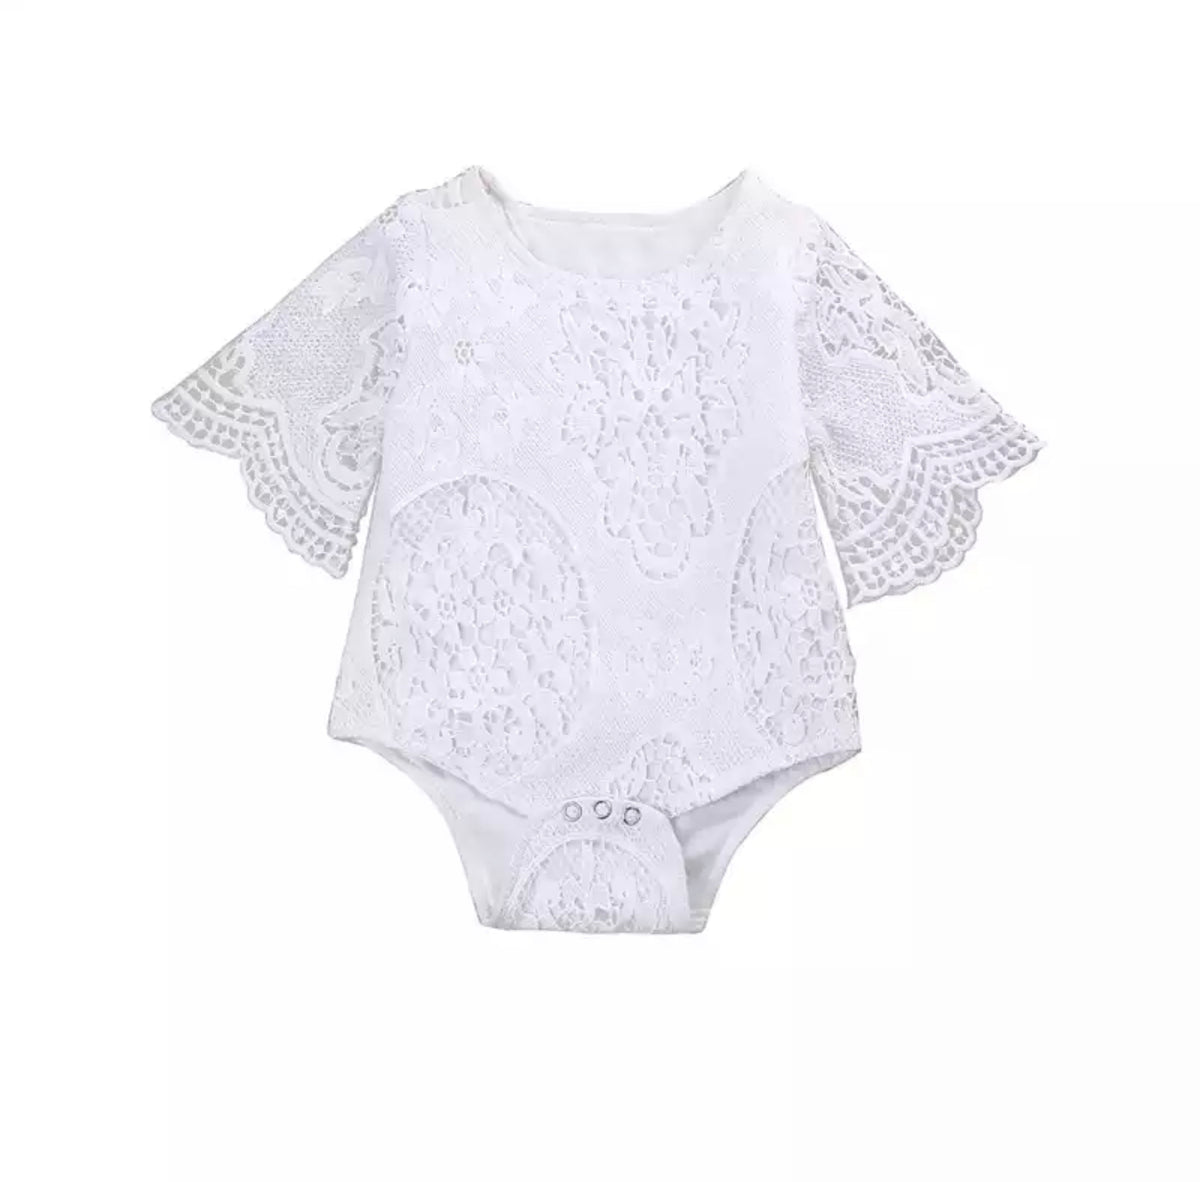 White Lace Romper - Excess Stock